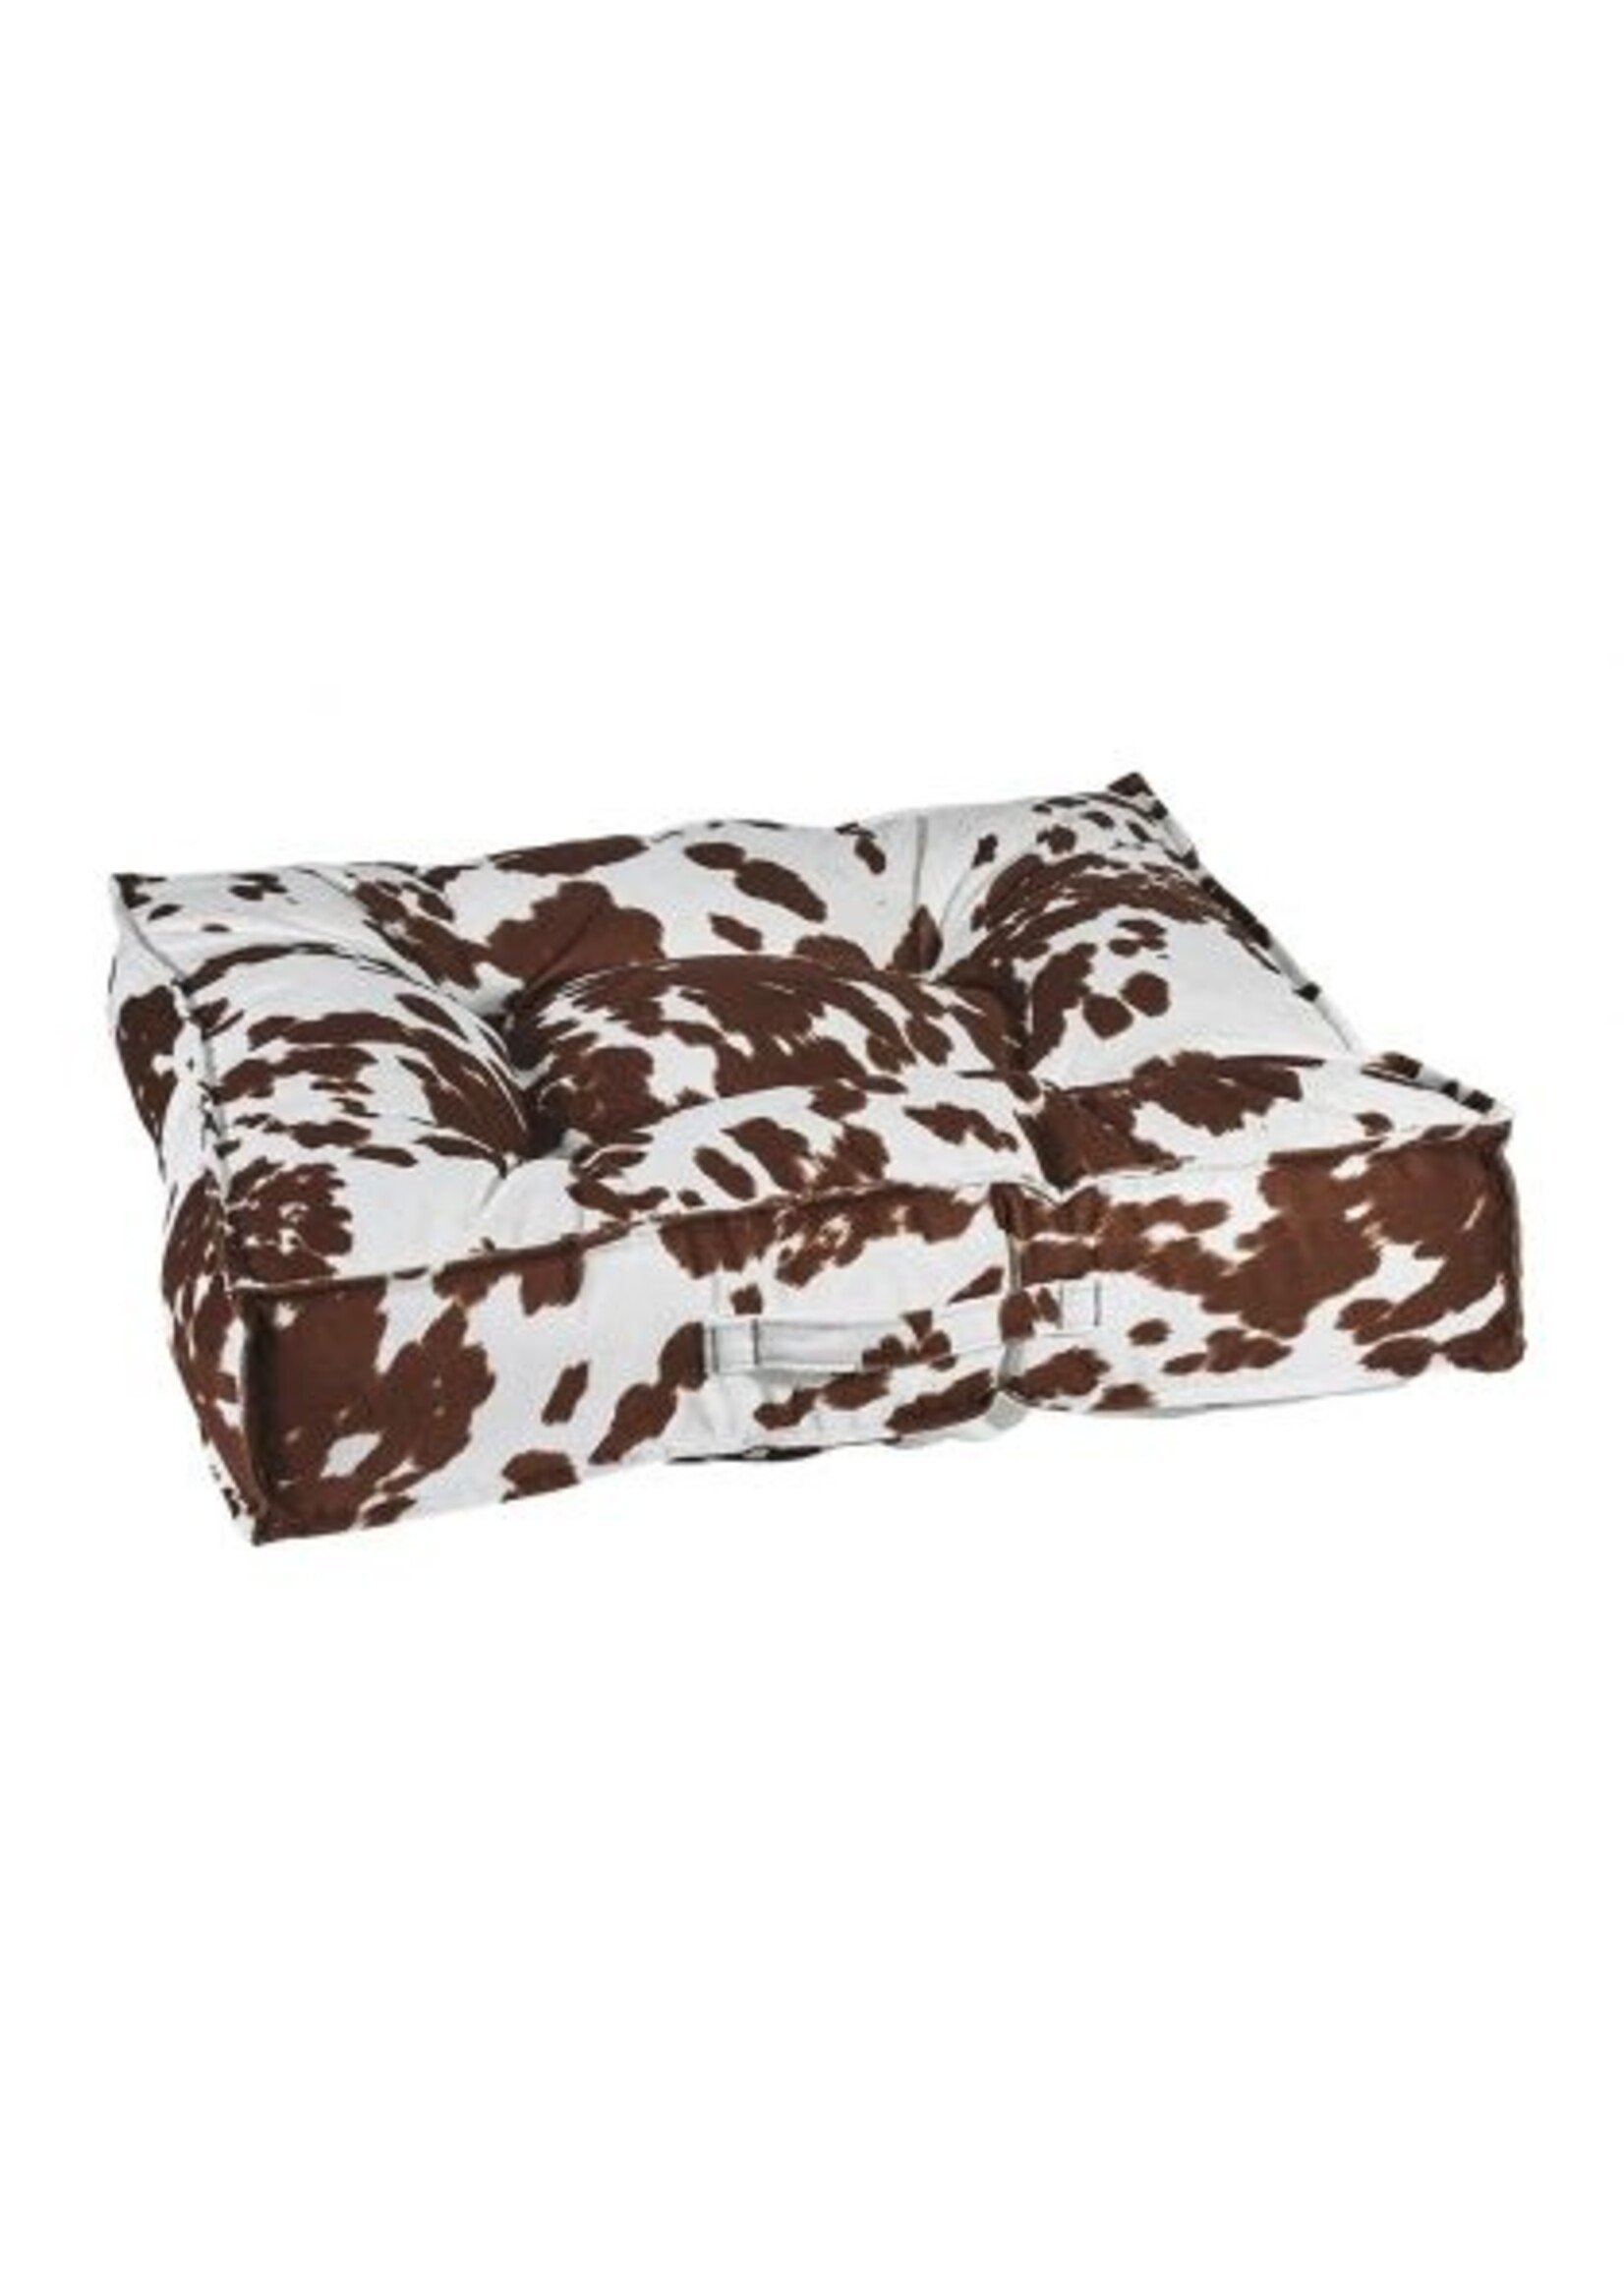 Bowsers Pet Products Bowsers Pet Piazza Bed